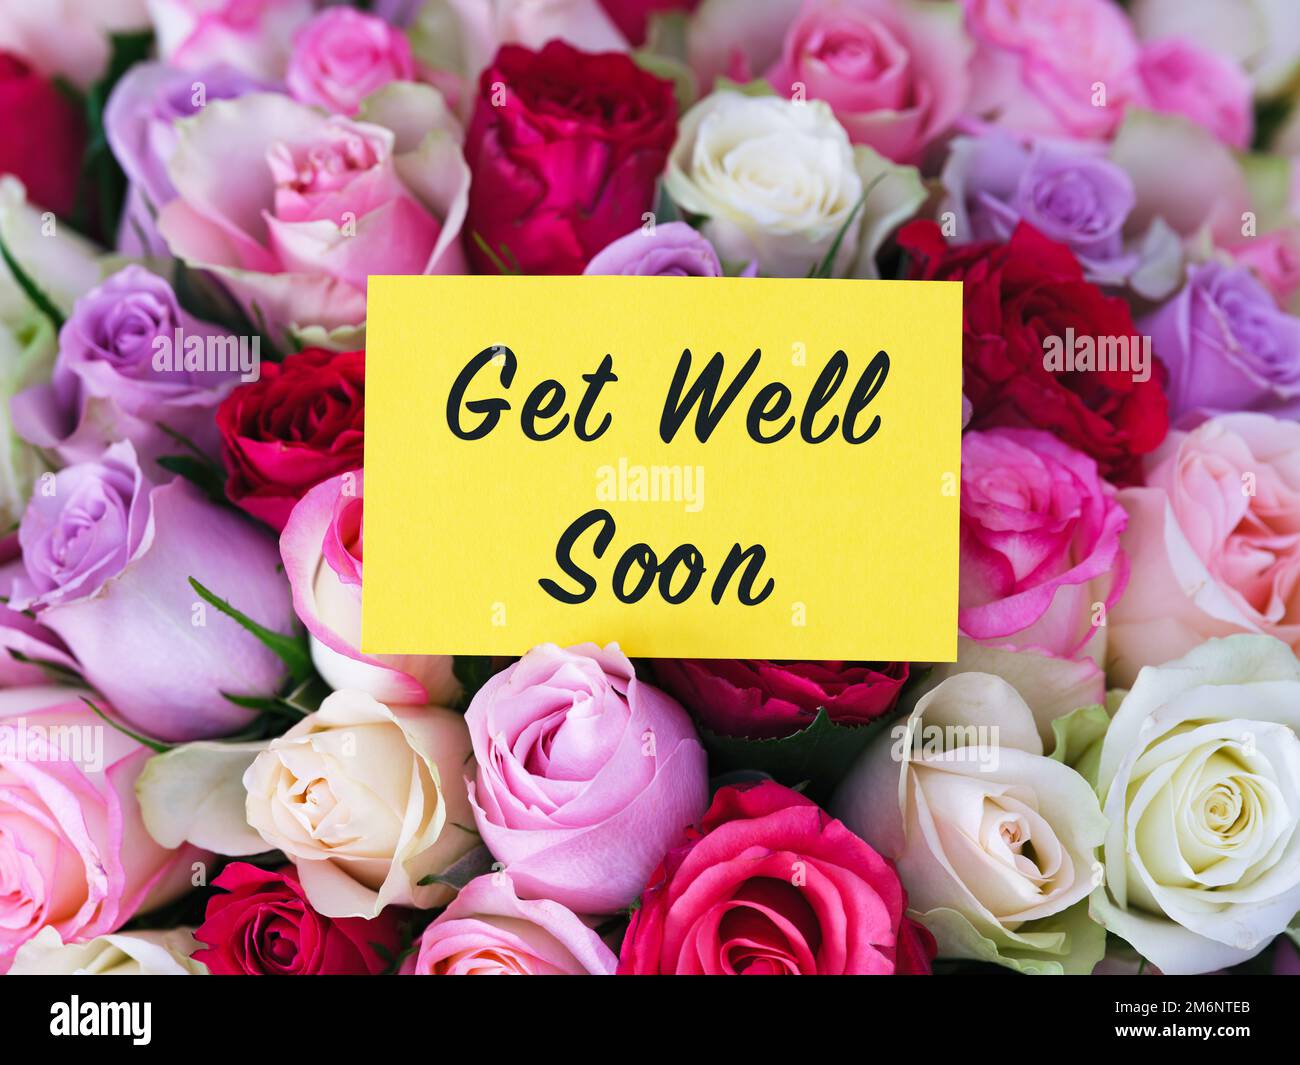 A yellow greeting card with words Get Well Soon laying on a big bouquet of colorful roses Stock Photo